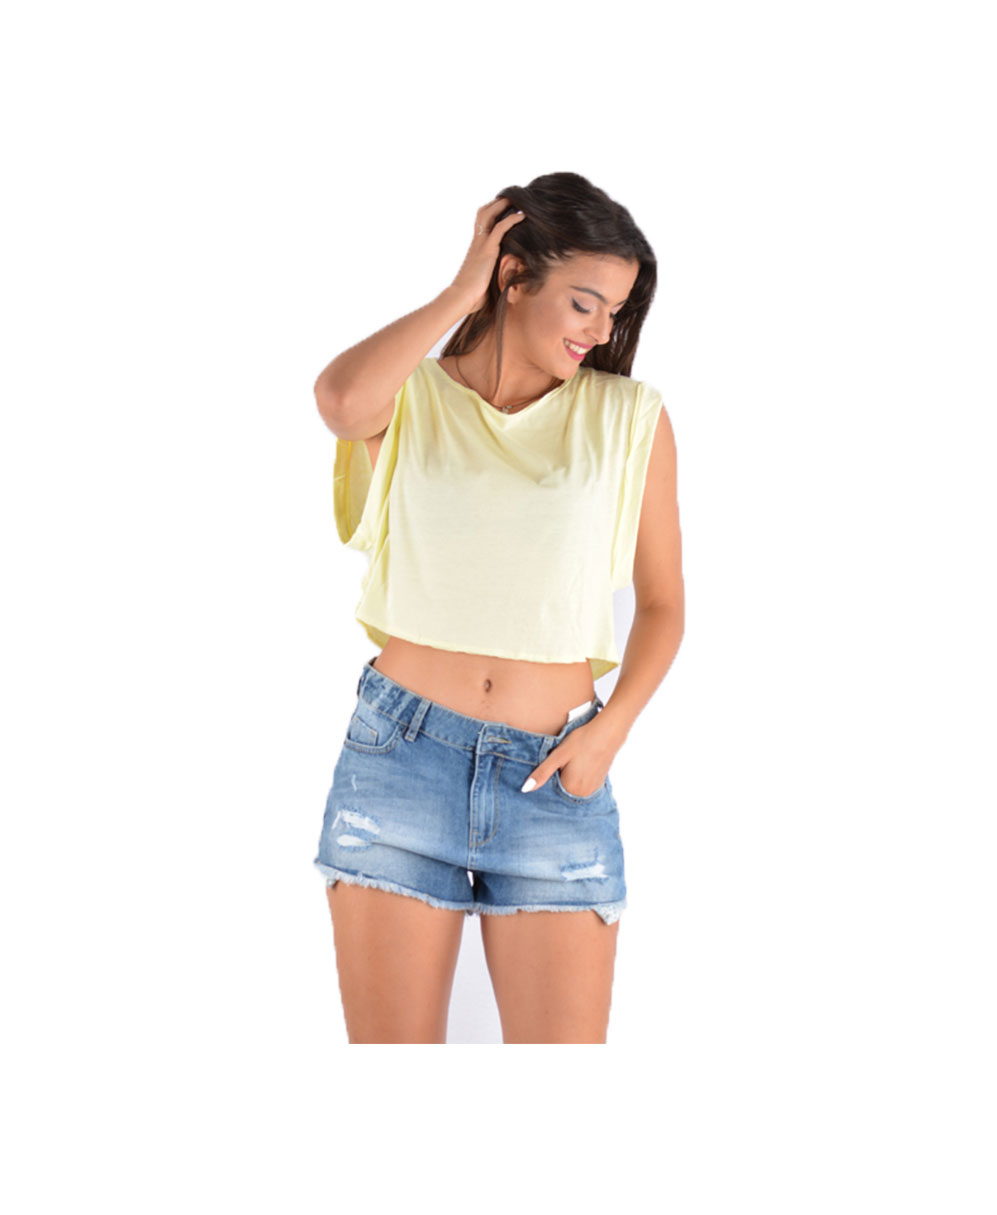 kitrino yellow cropped top krop top crop top super sales summer deals summer offers summer bazzar ola misi timi